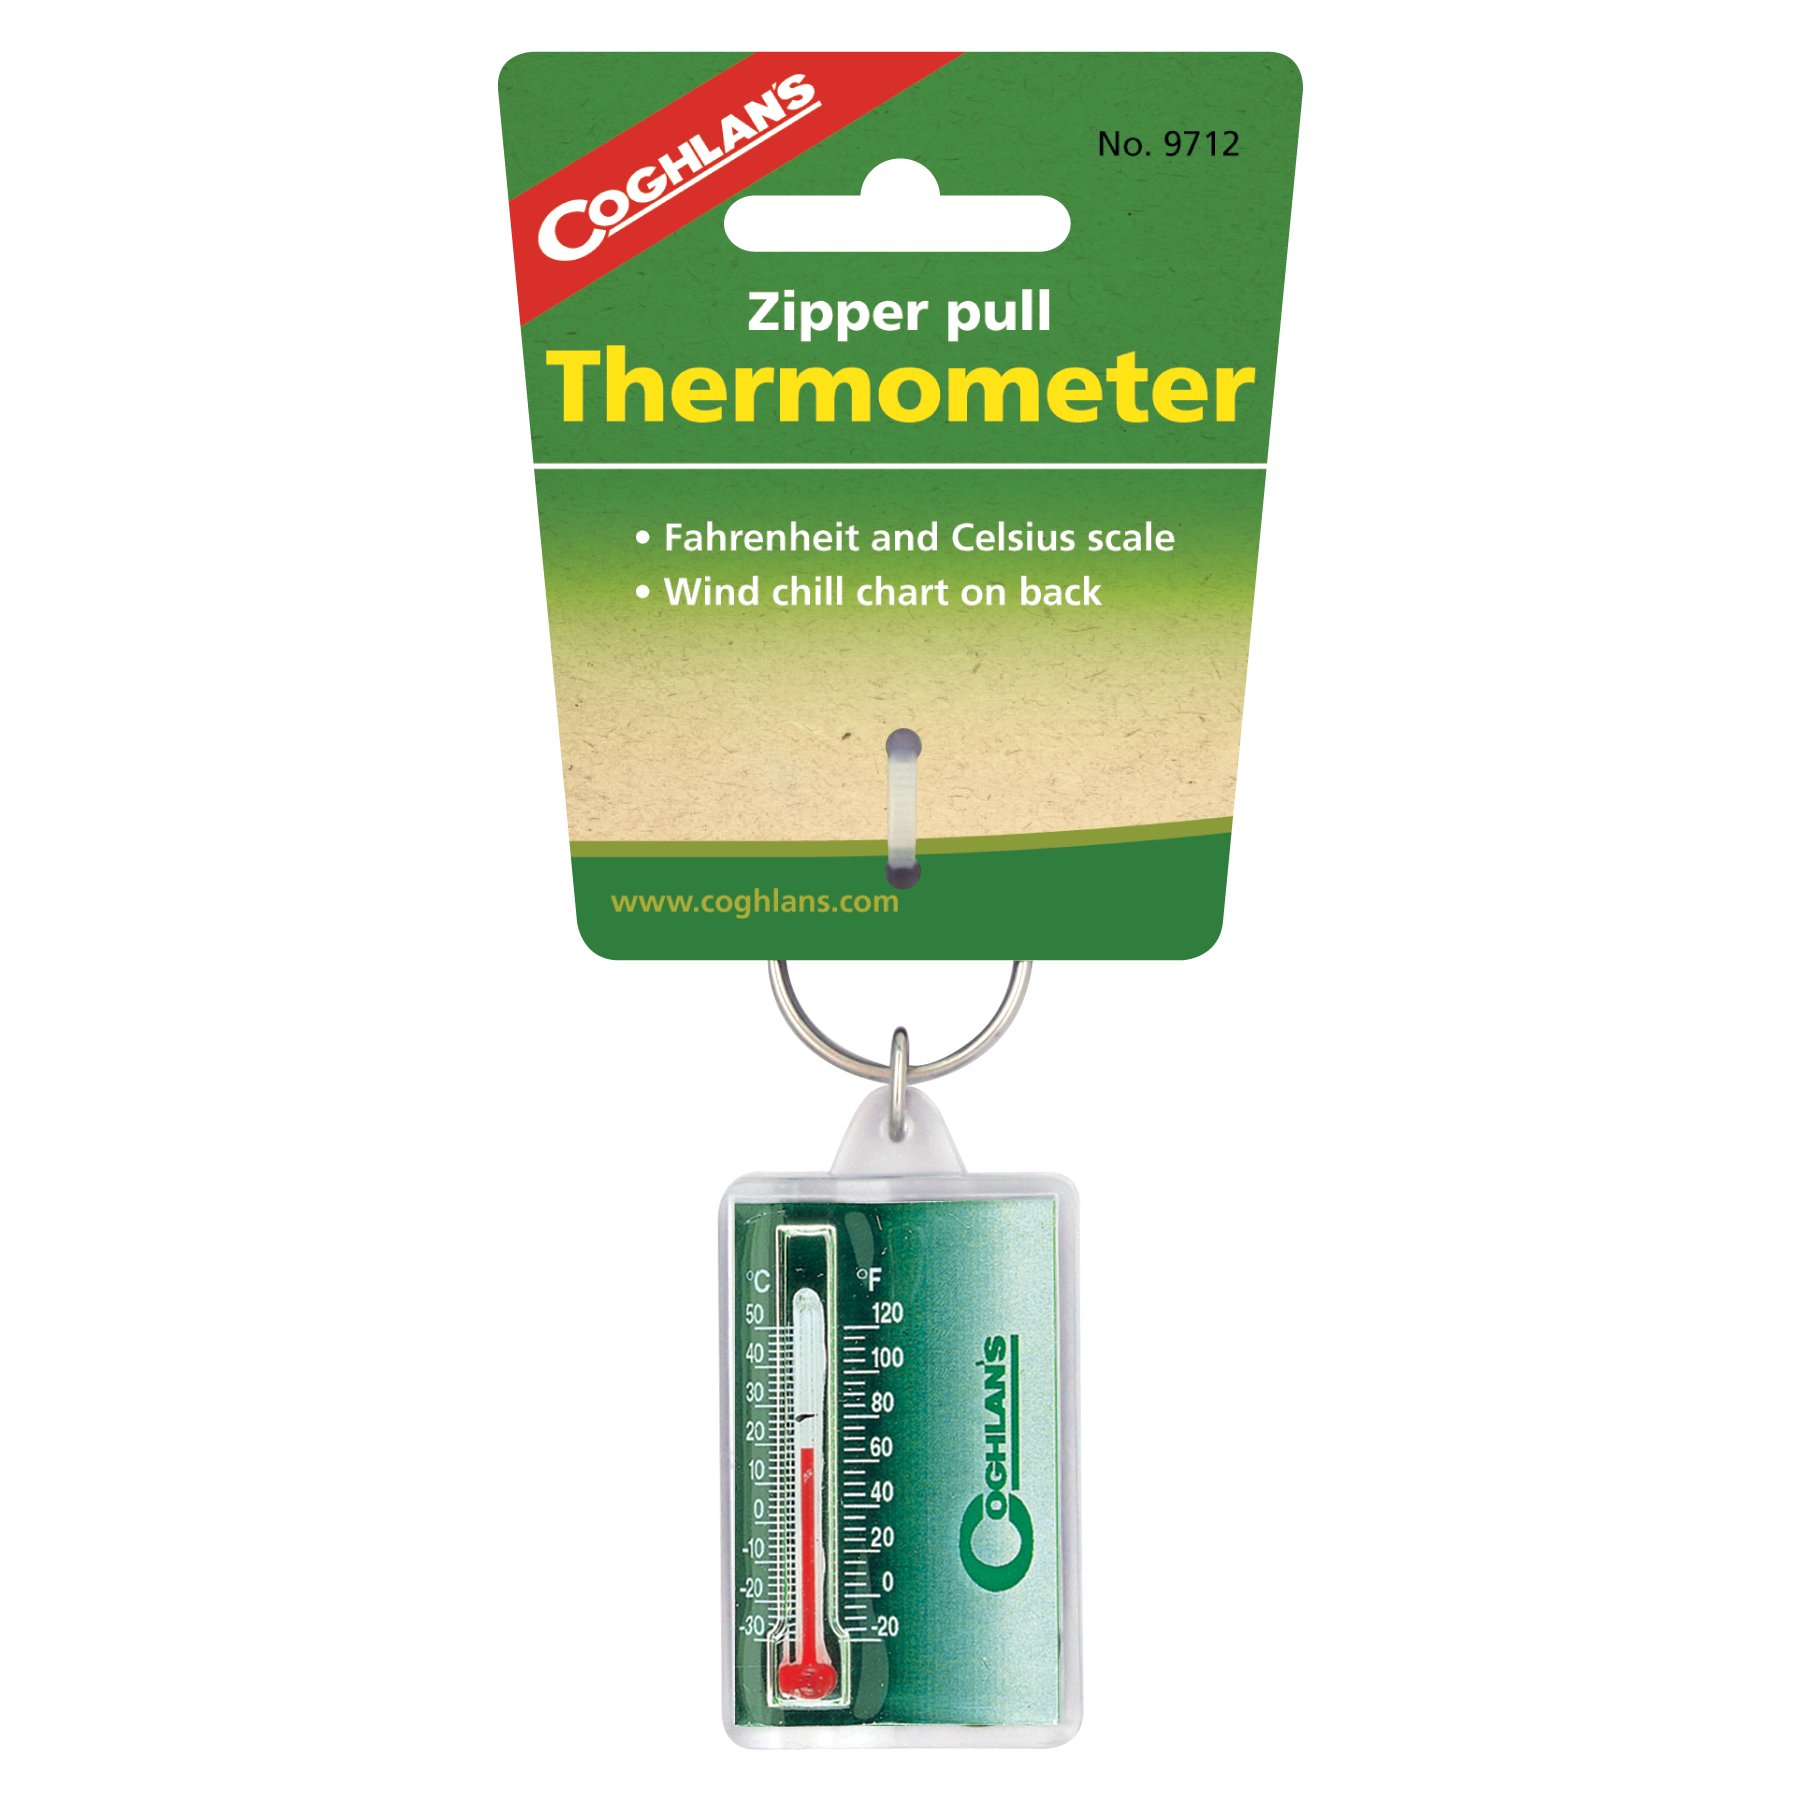 THERMOMETER,ZIPPER PULL